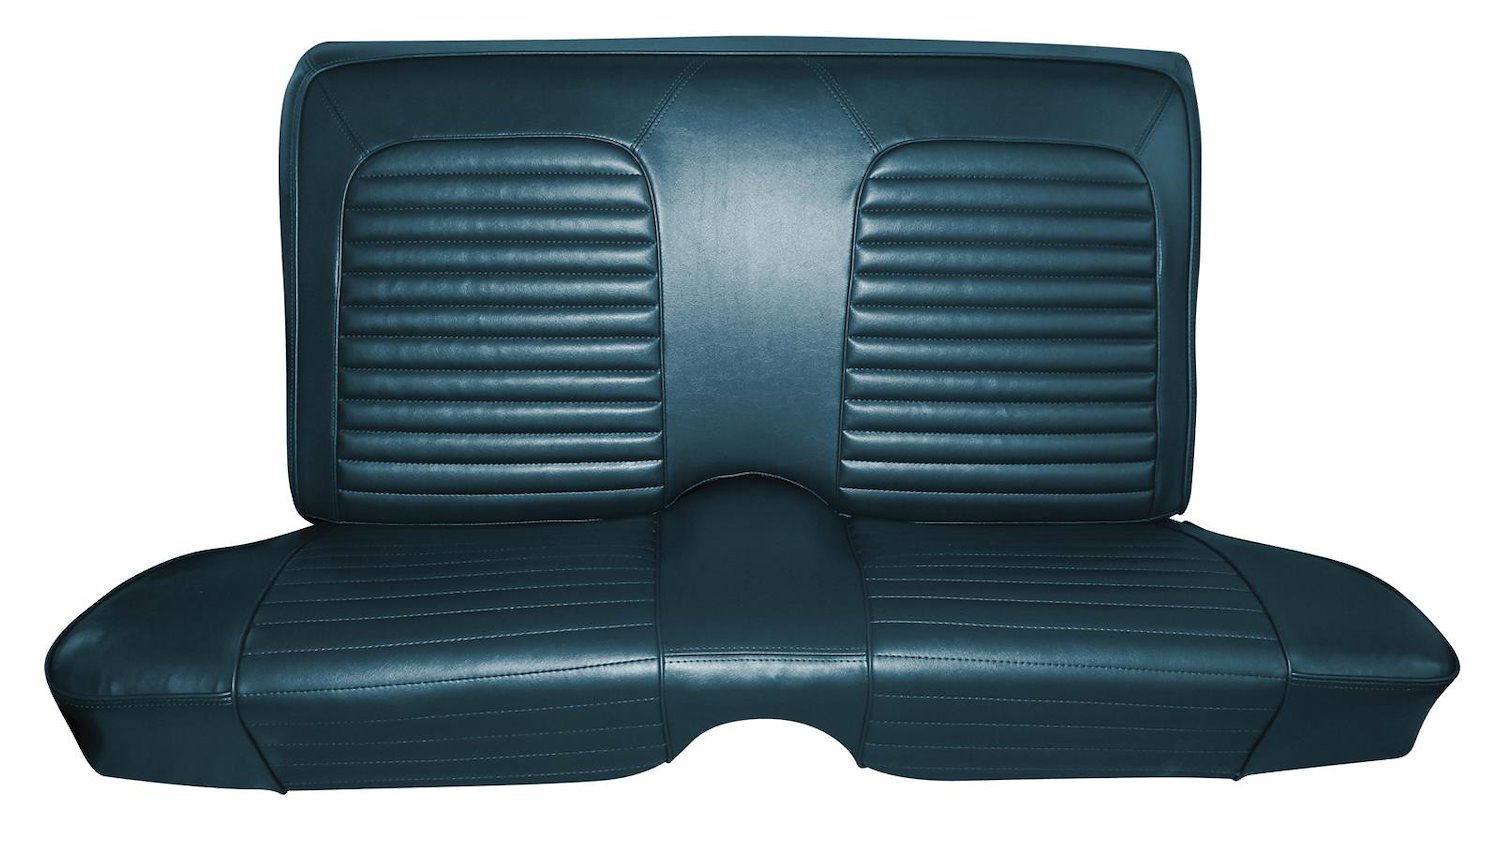 1970 Chevrolet Chevelle Malibu and Super Sport Convertible Interior Rear Bench Seat Upholstery Set